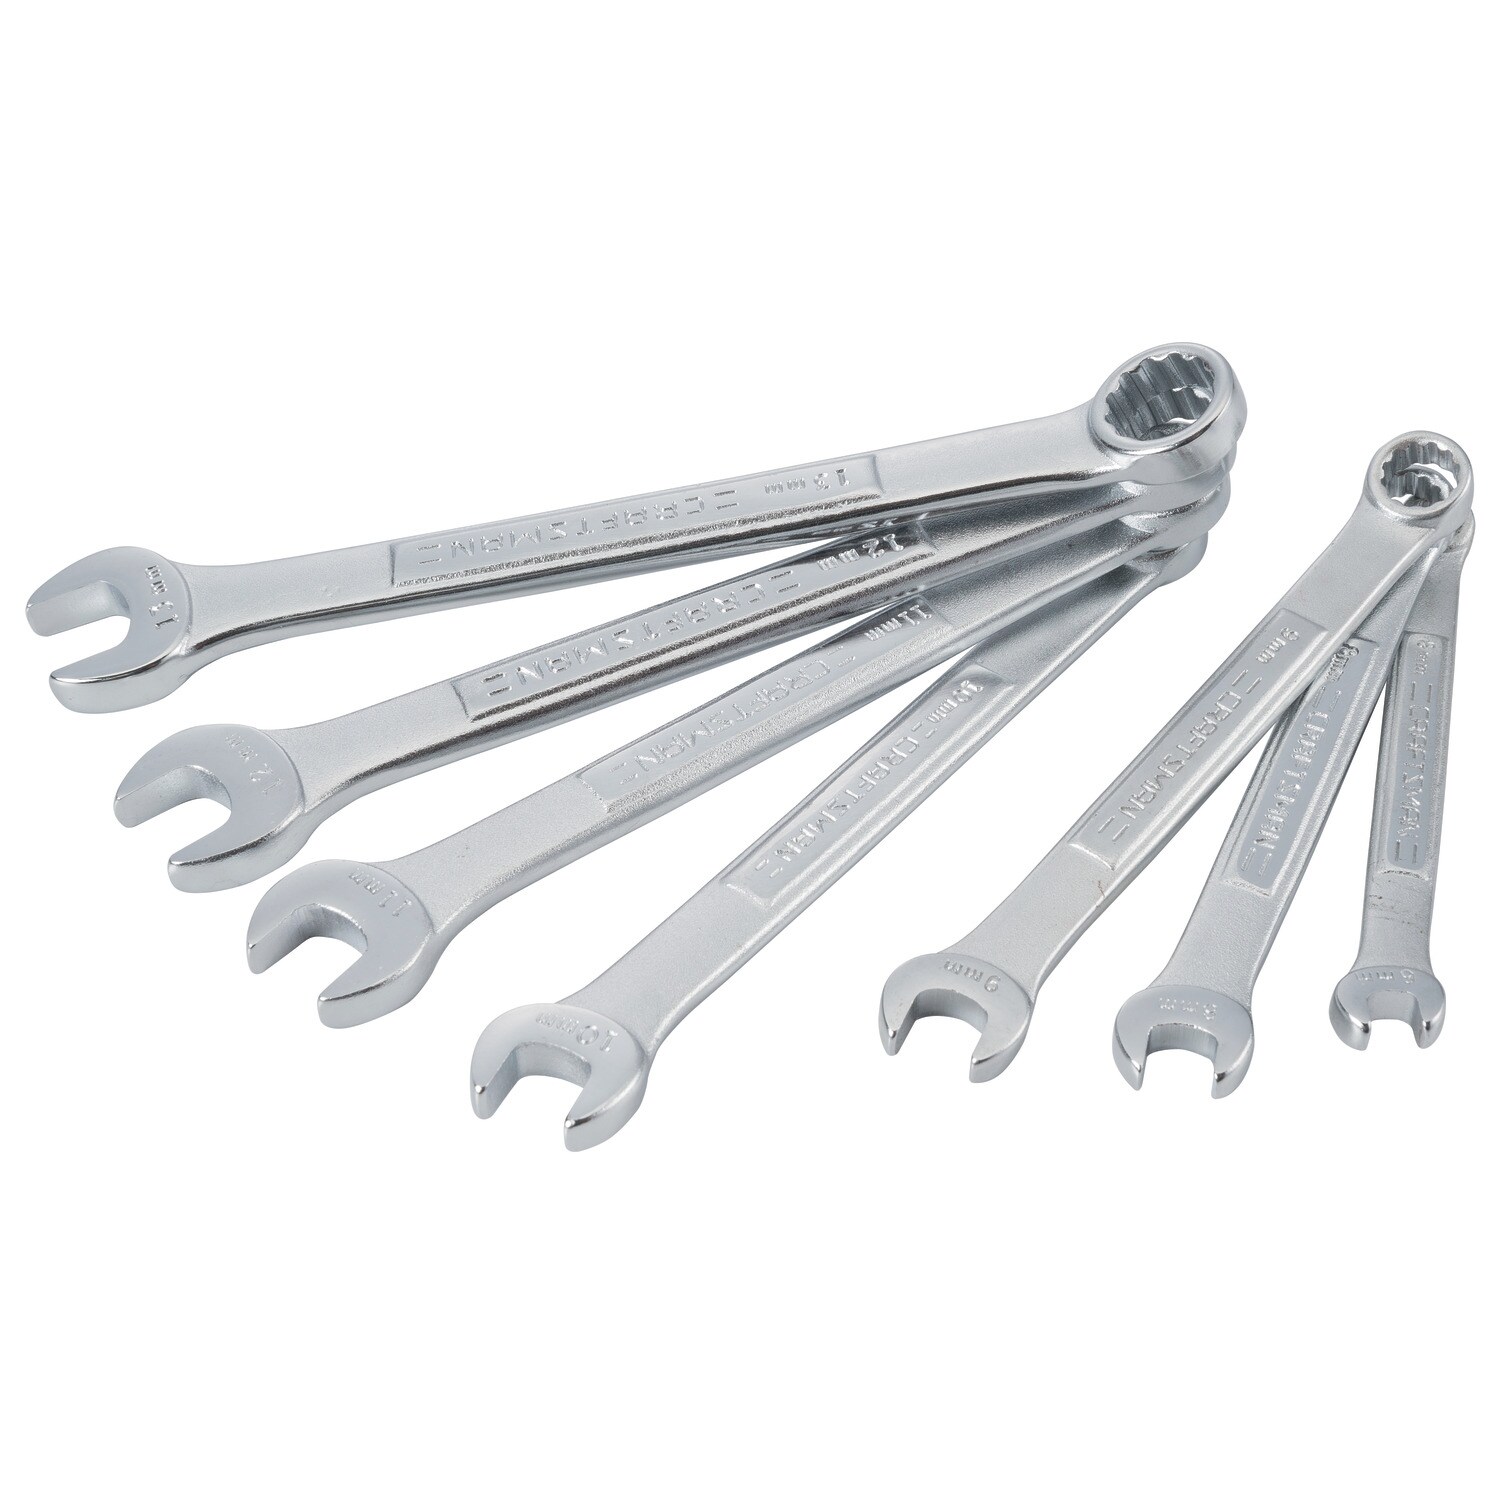 Details about   Craftsman 7PC Metric 12PT Combination Wrench Set CMMT87015 10-19mm NEW 